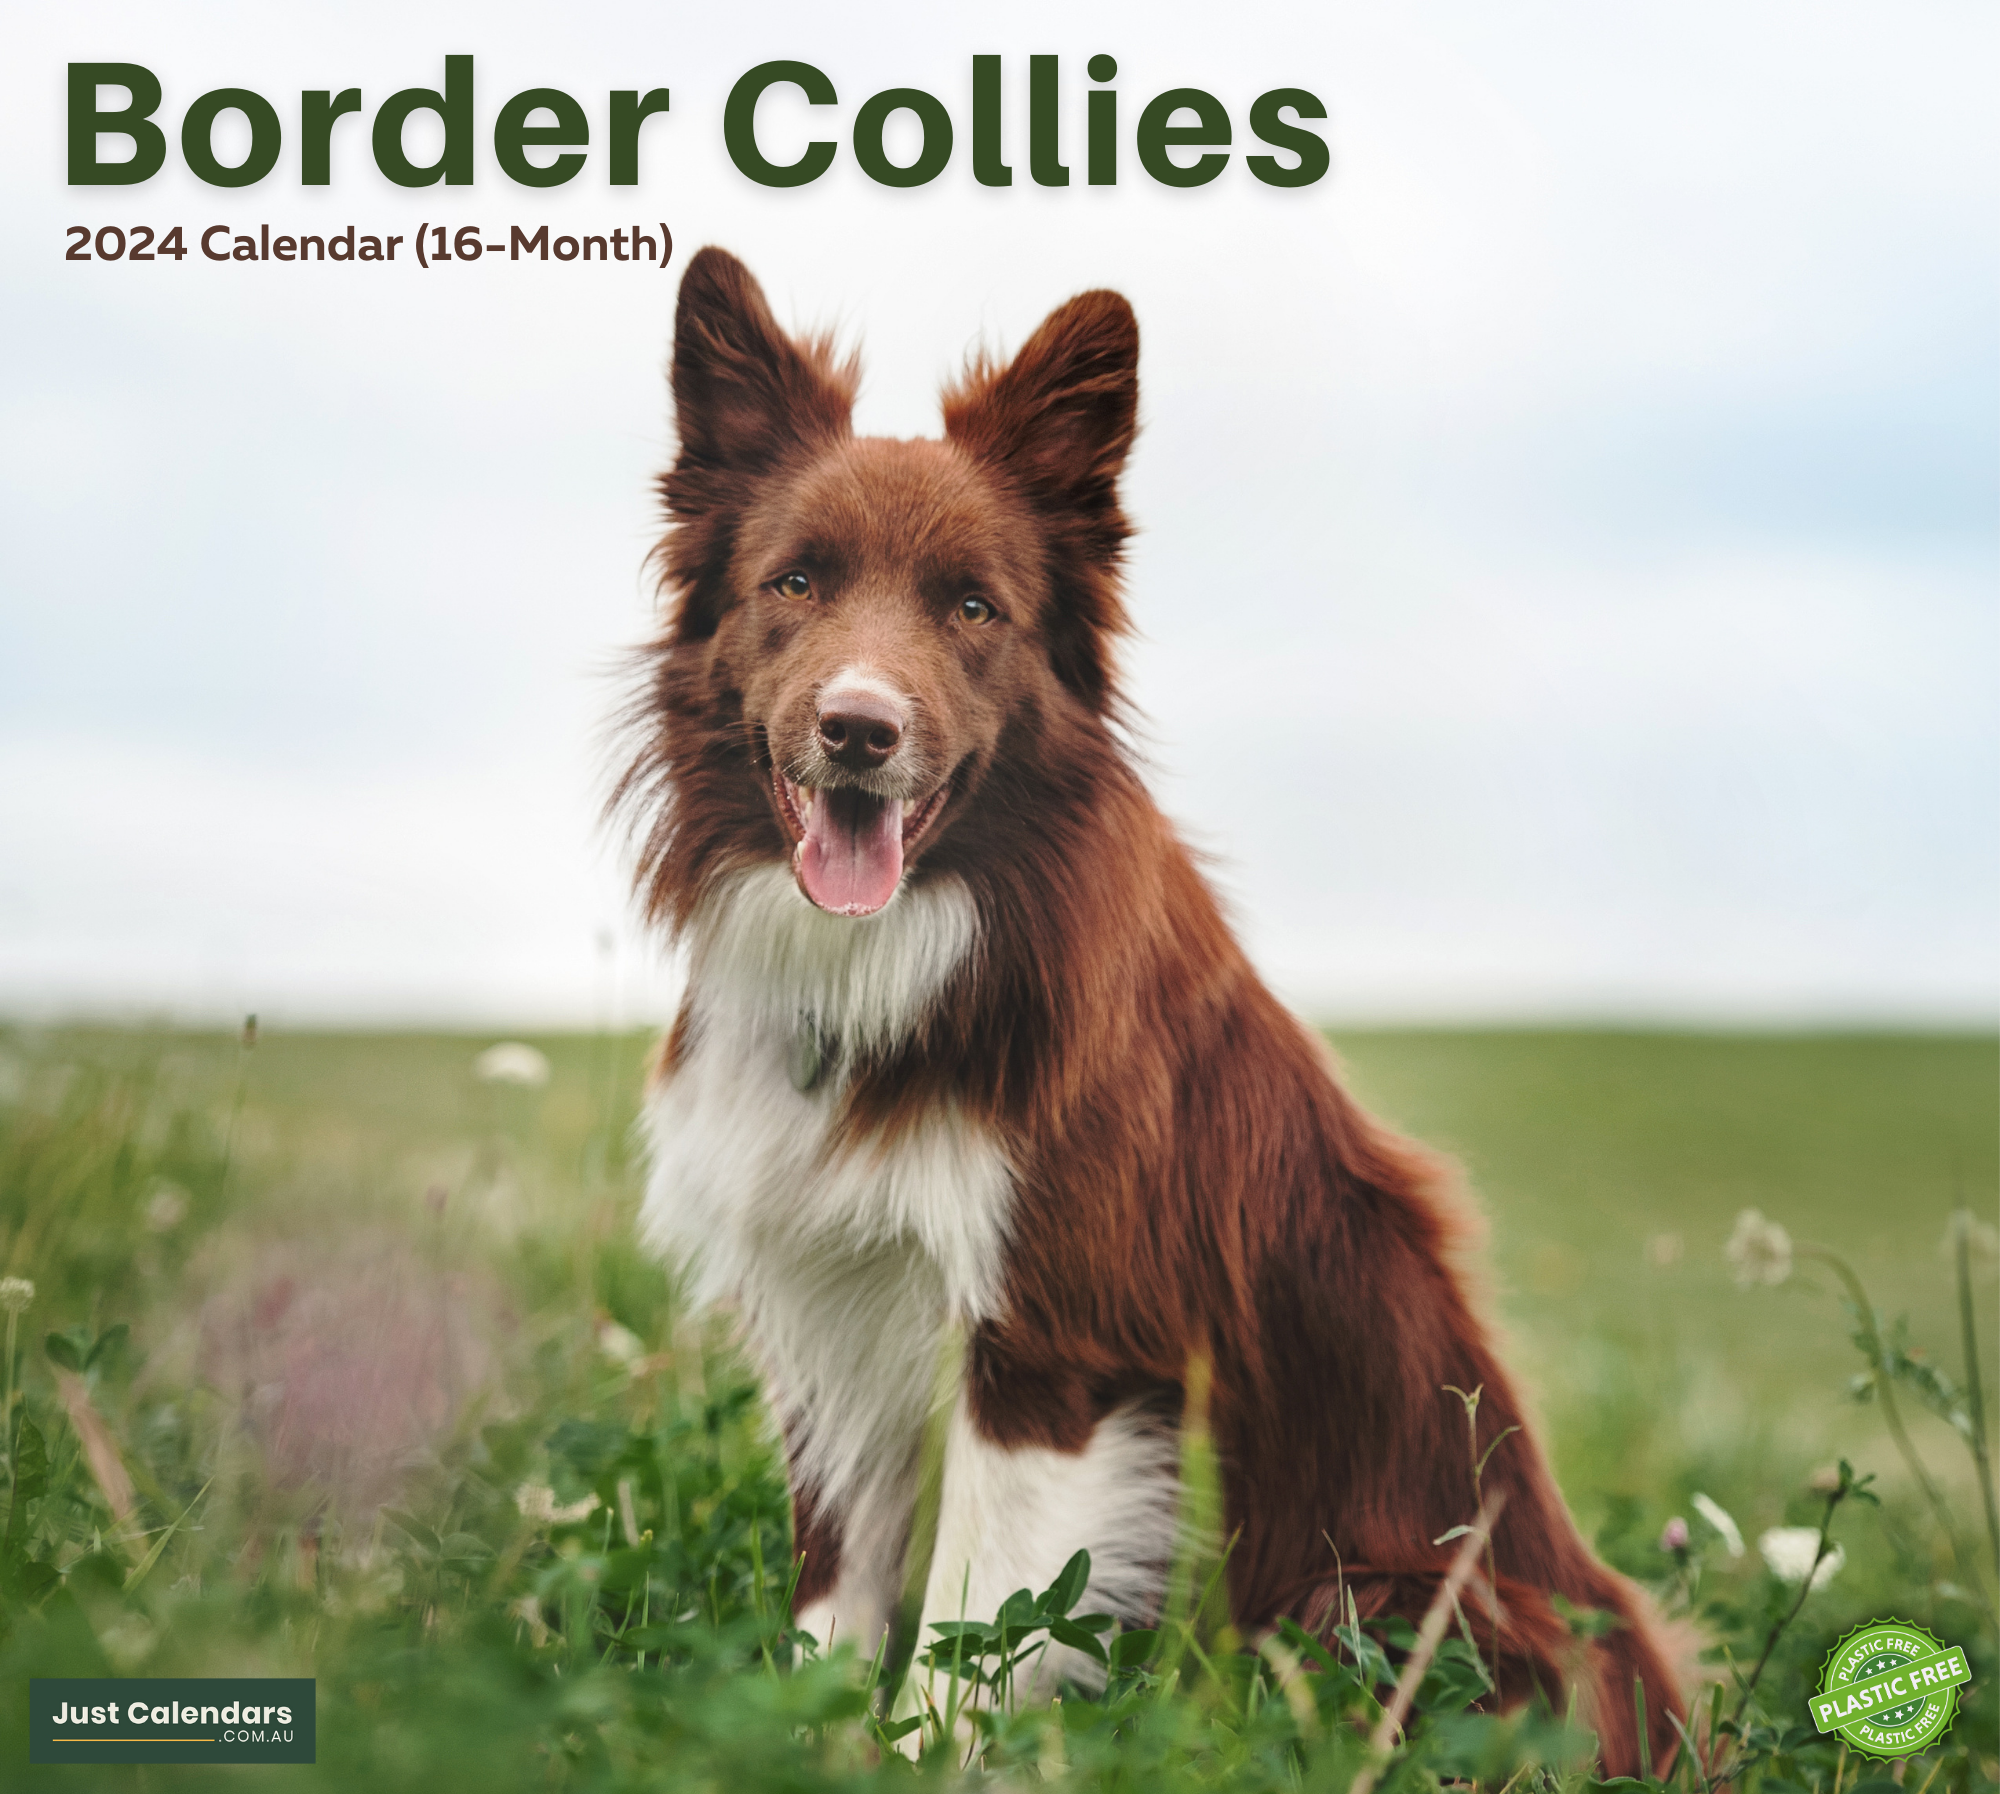 2024 Border Collies Dogs & Puppies - Deluxe Wall Calendar by Just Calendars - 16 Month - Plastic Free